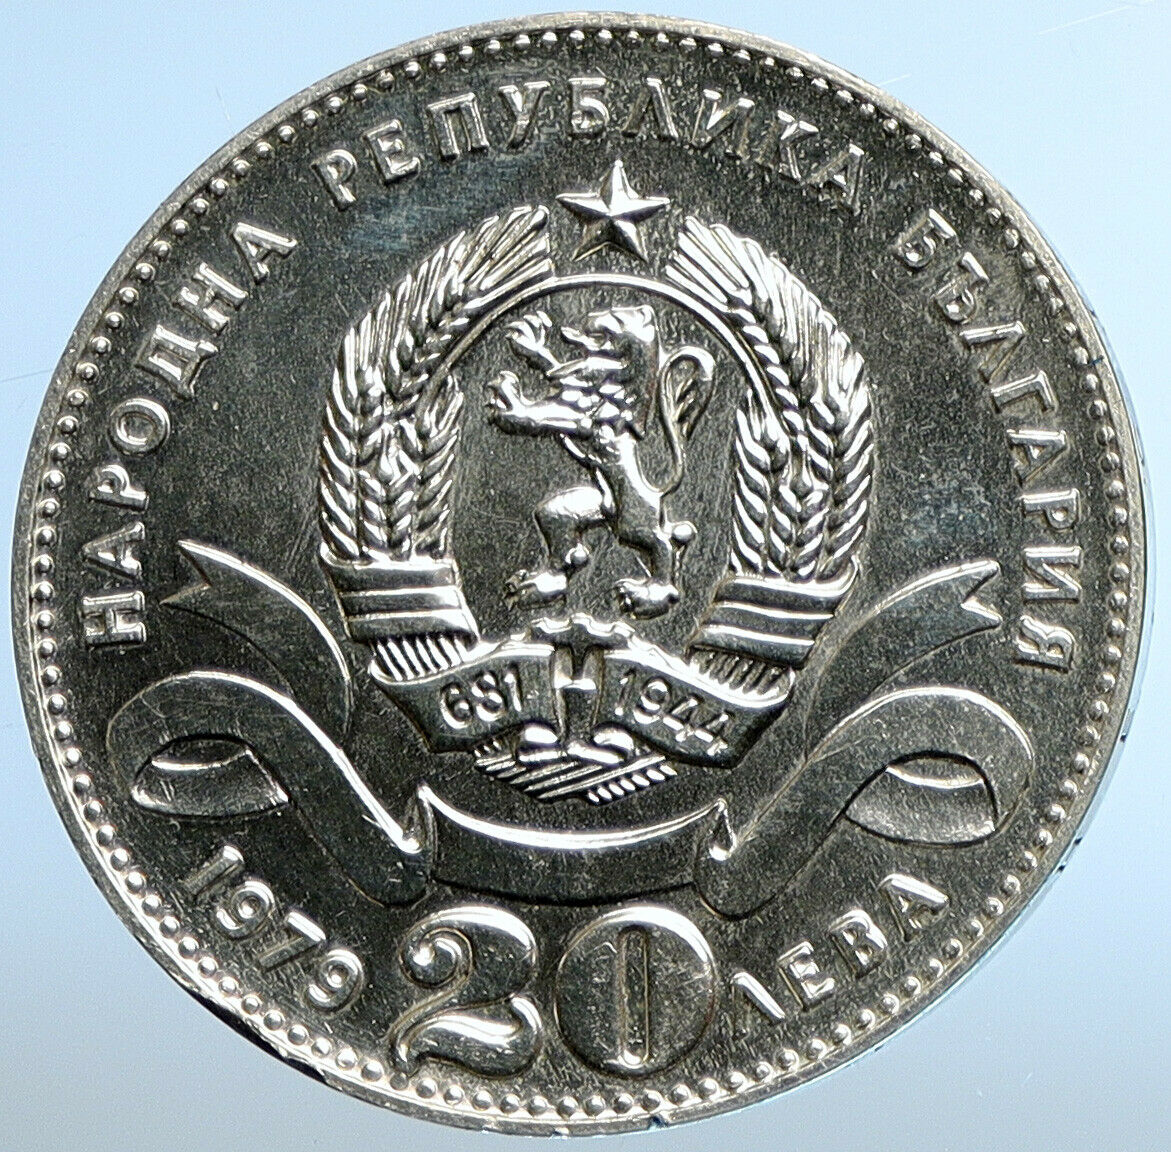 1979 BULGARIA 100Yrs of SOFIA as CAPITOL Vintage Old Silver 20 Leva Coin i111112